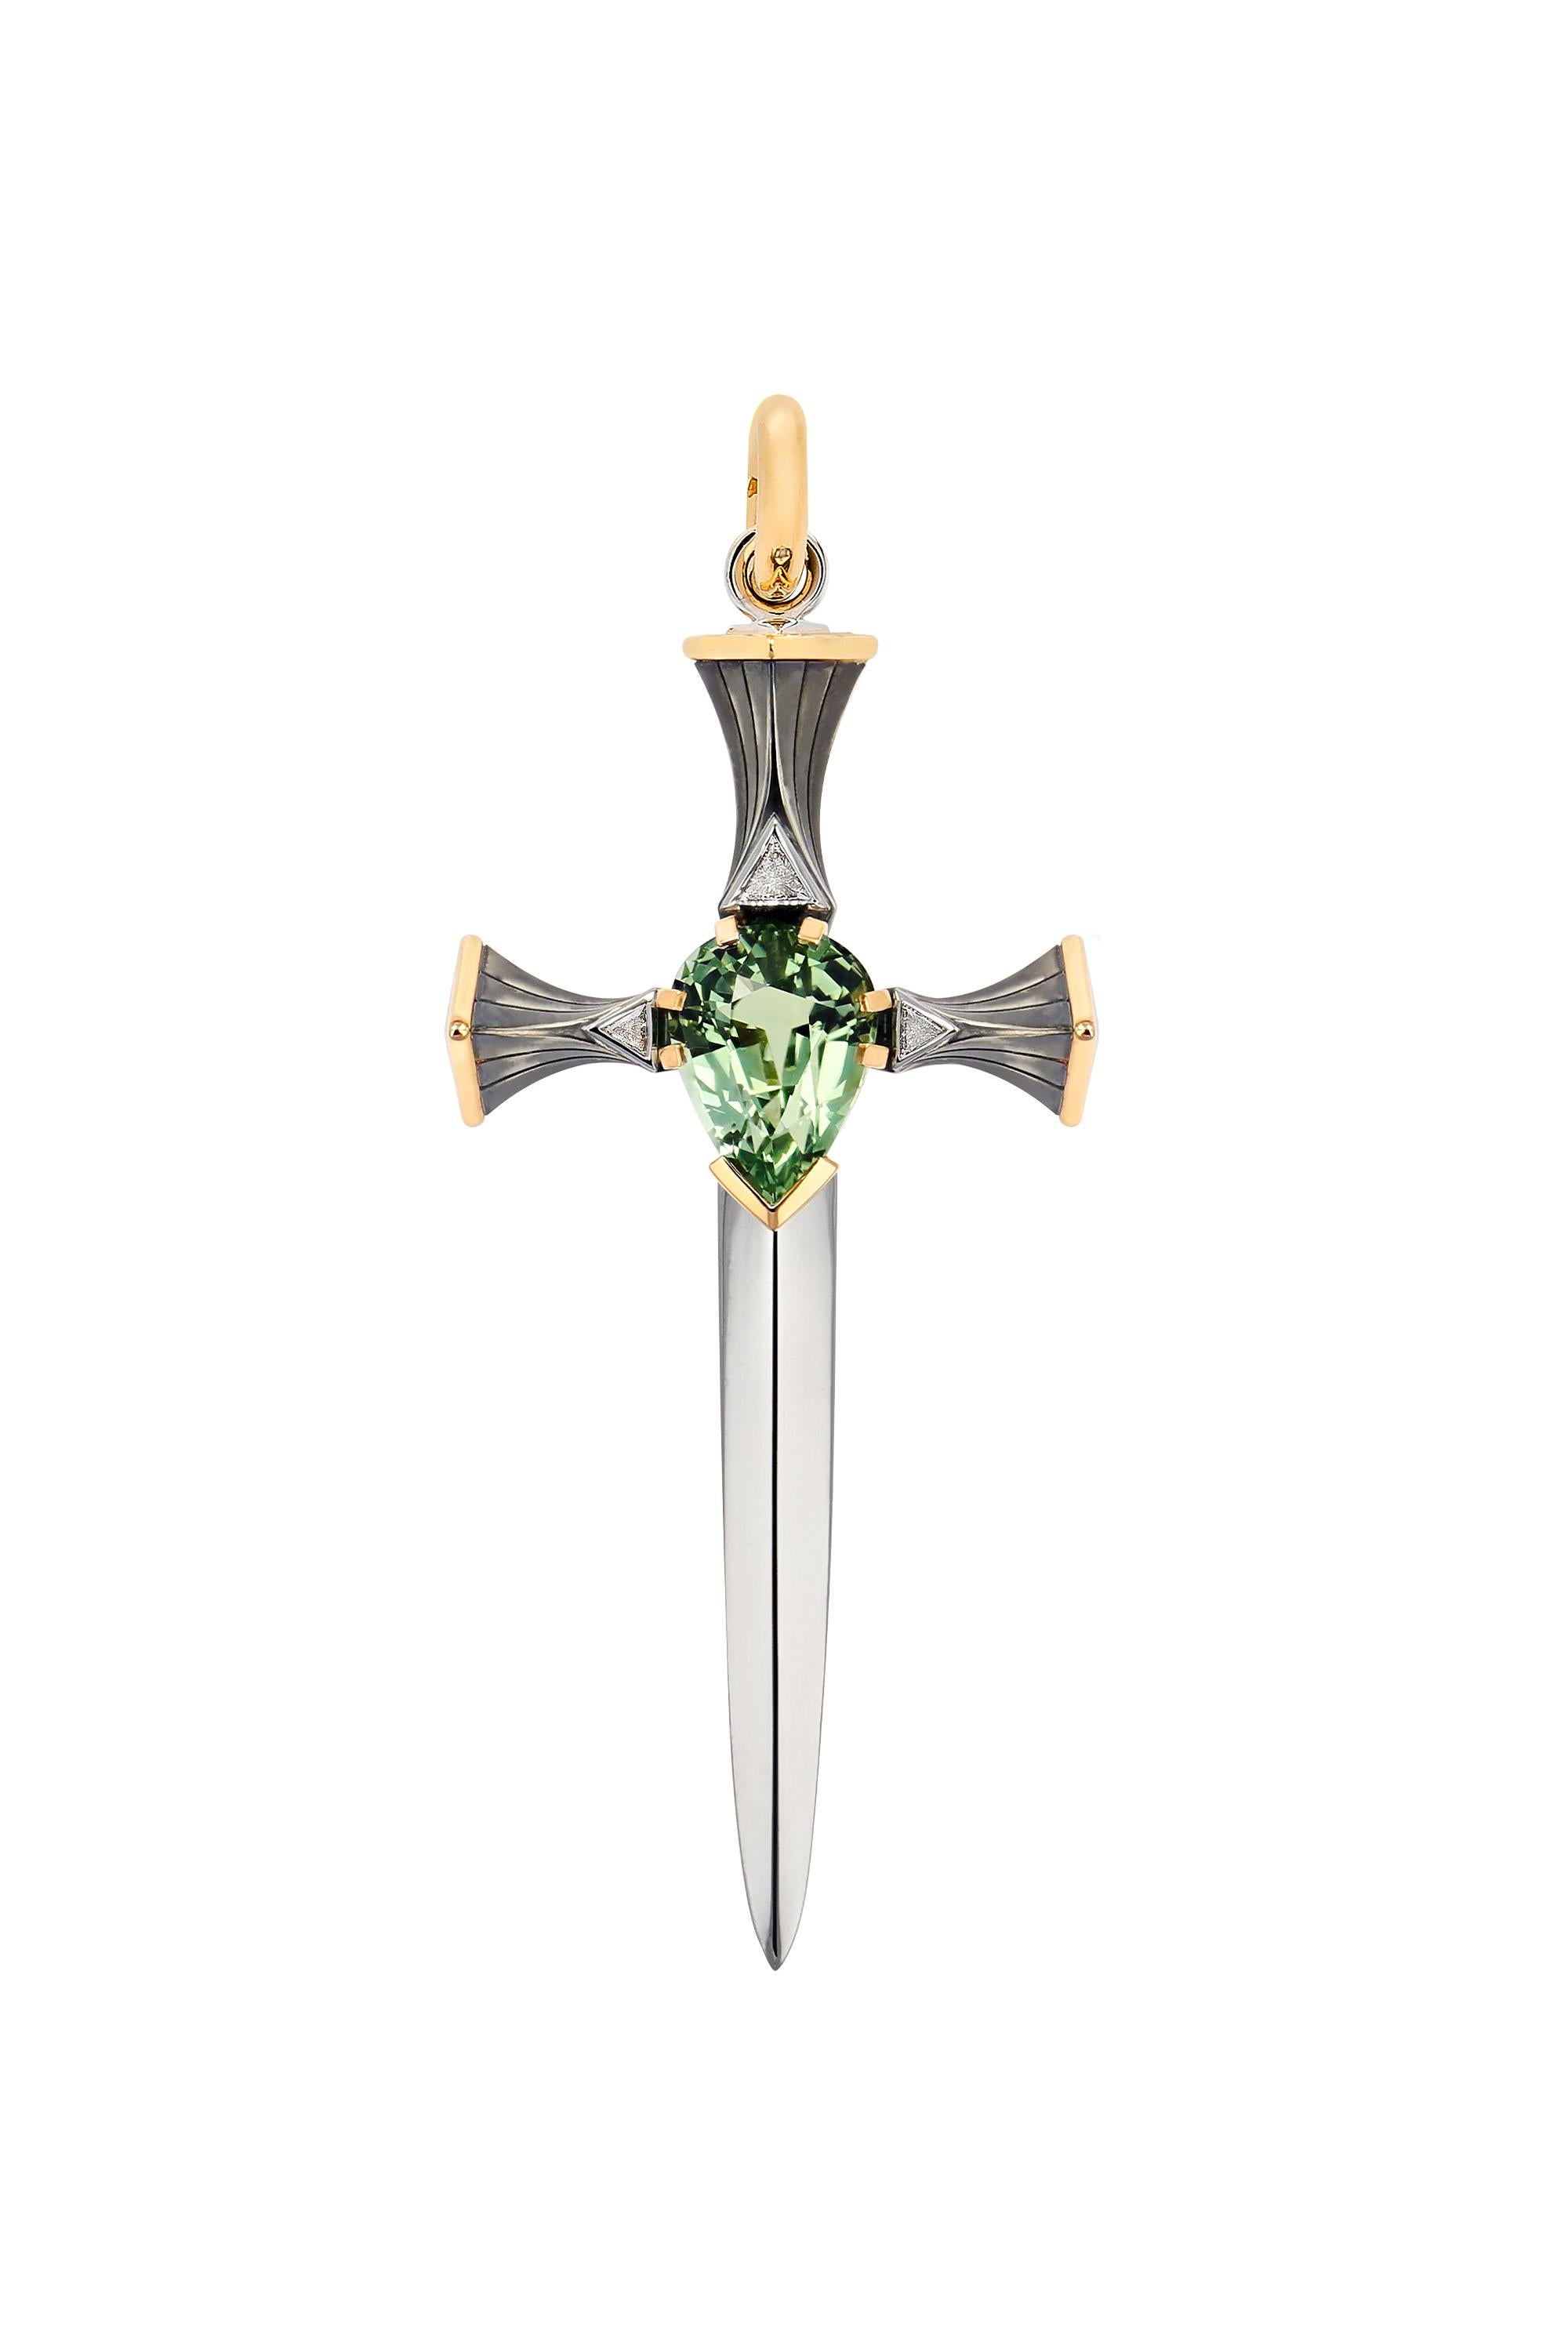 Épée with a gold and distressed silver handle, featuring in its center a pear-shaped tourmaline surrounded by triangular diamonds, extending into a mirror-polished platinum blade. Openable gold bail. 

Sold without chain.

Available with chain on